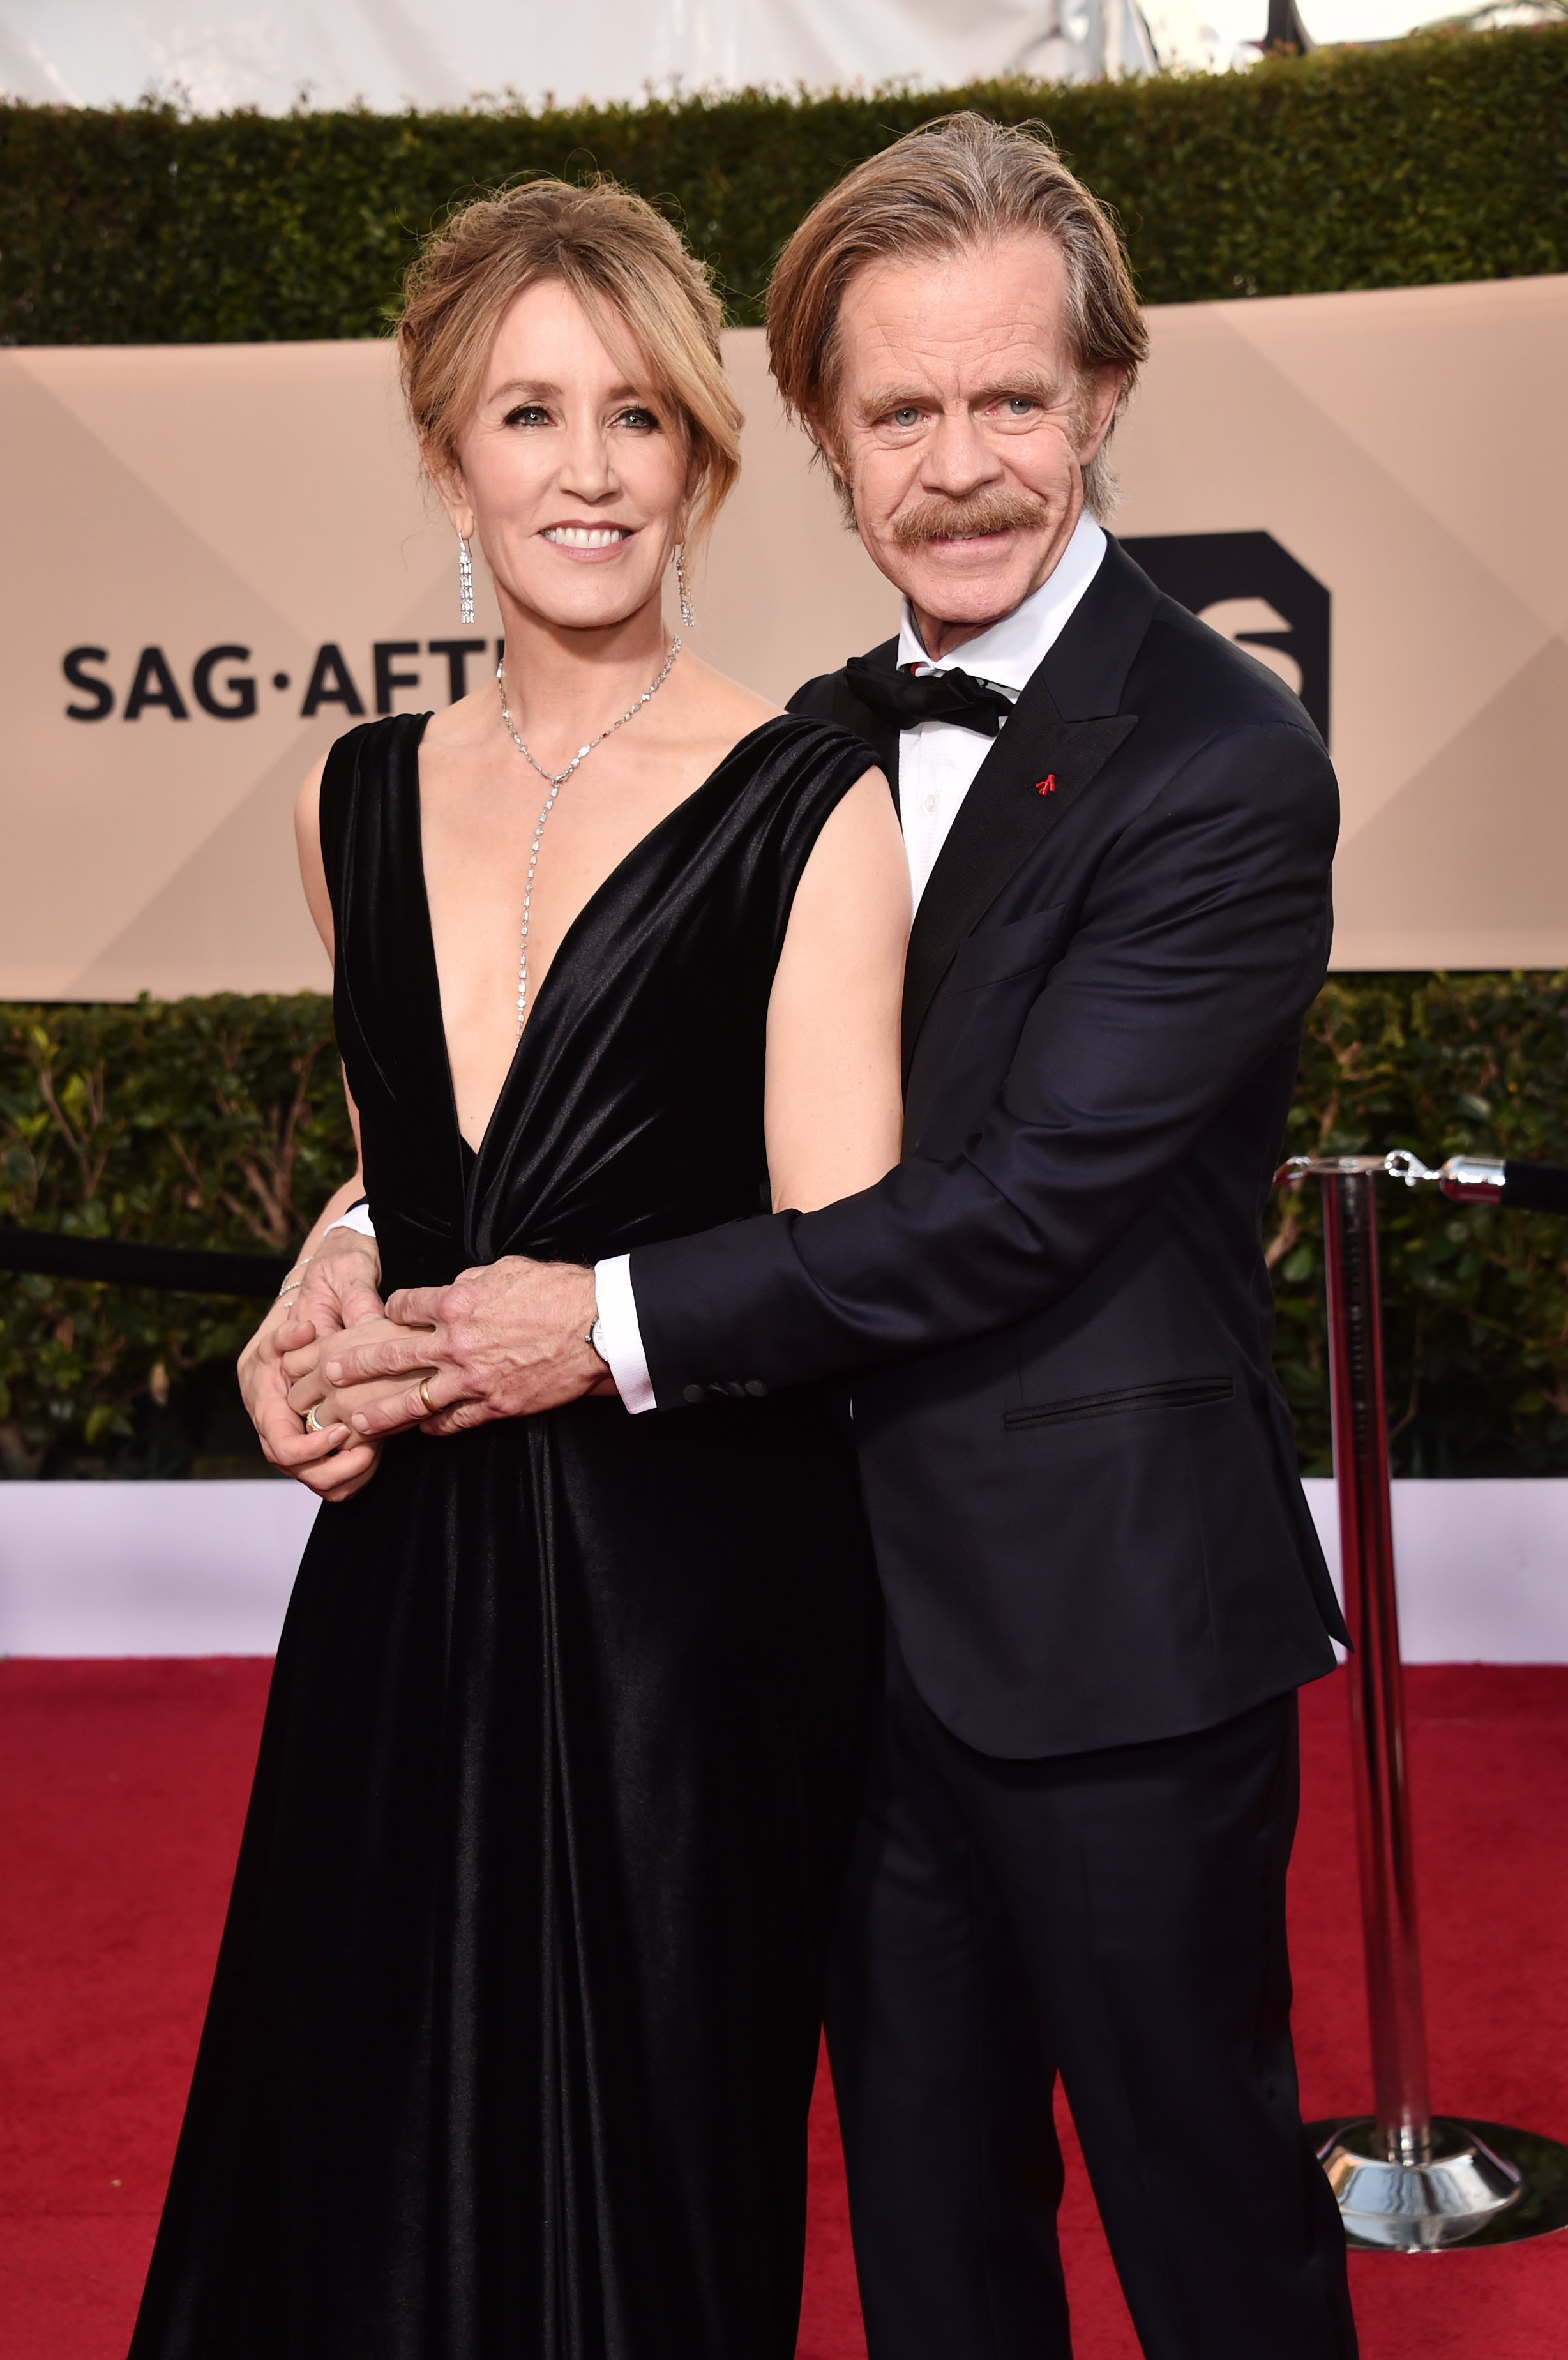 Felicity Huffman and William H Macy attend the Screen Actors Guild Awards in Los Angeles on January 21, 2018 | Photo: Getty Images